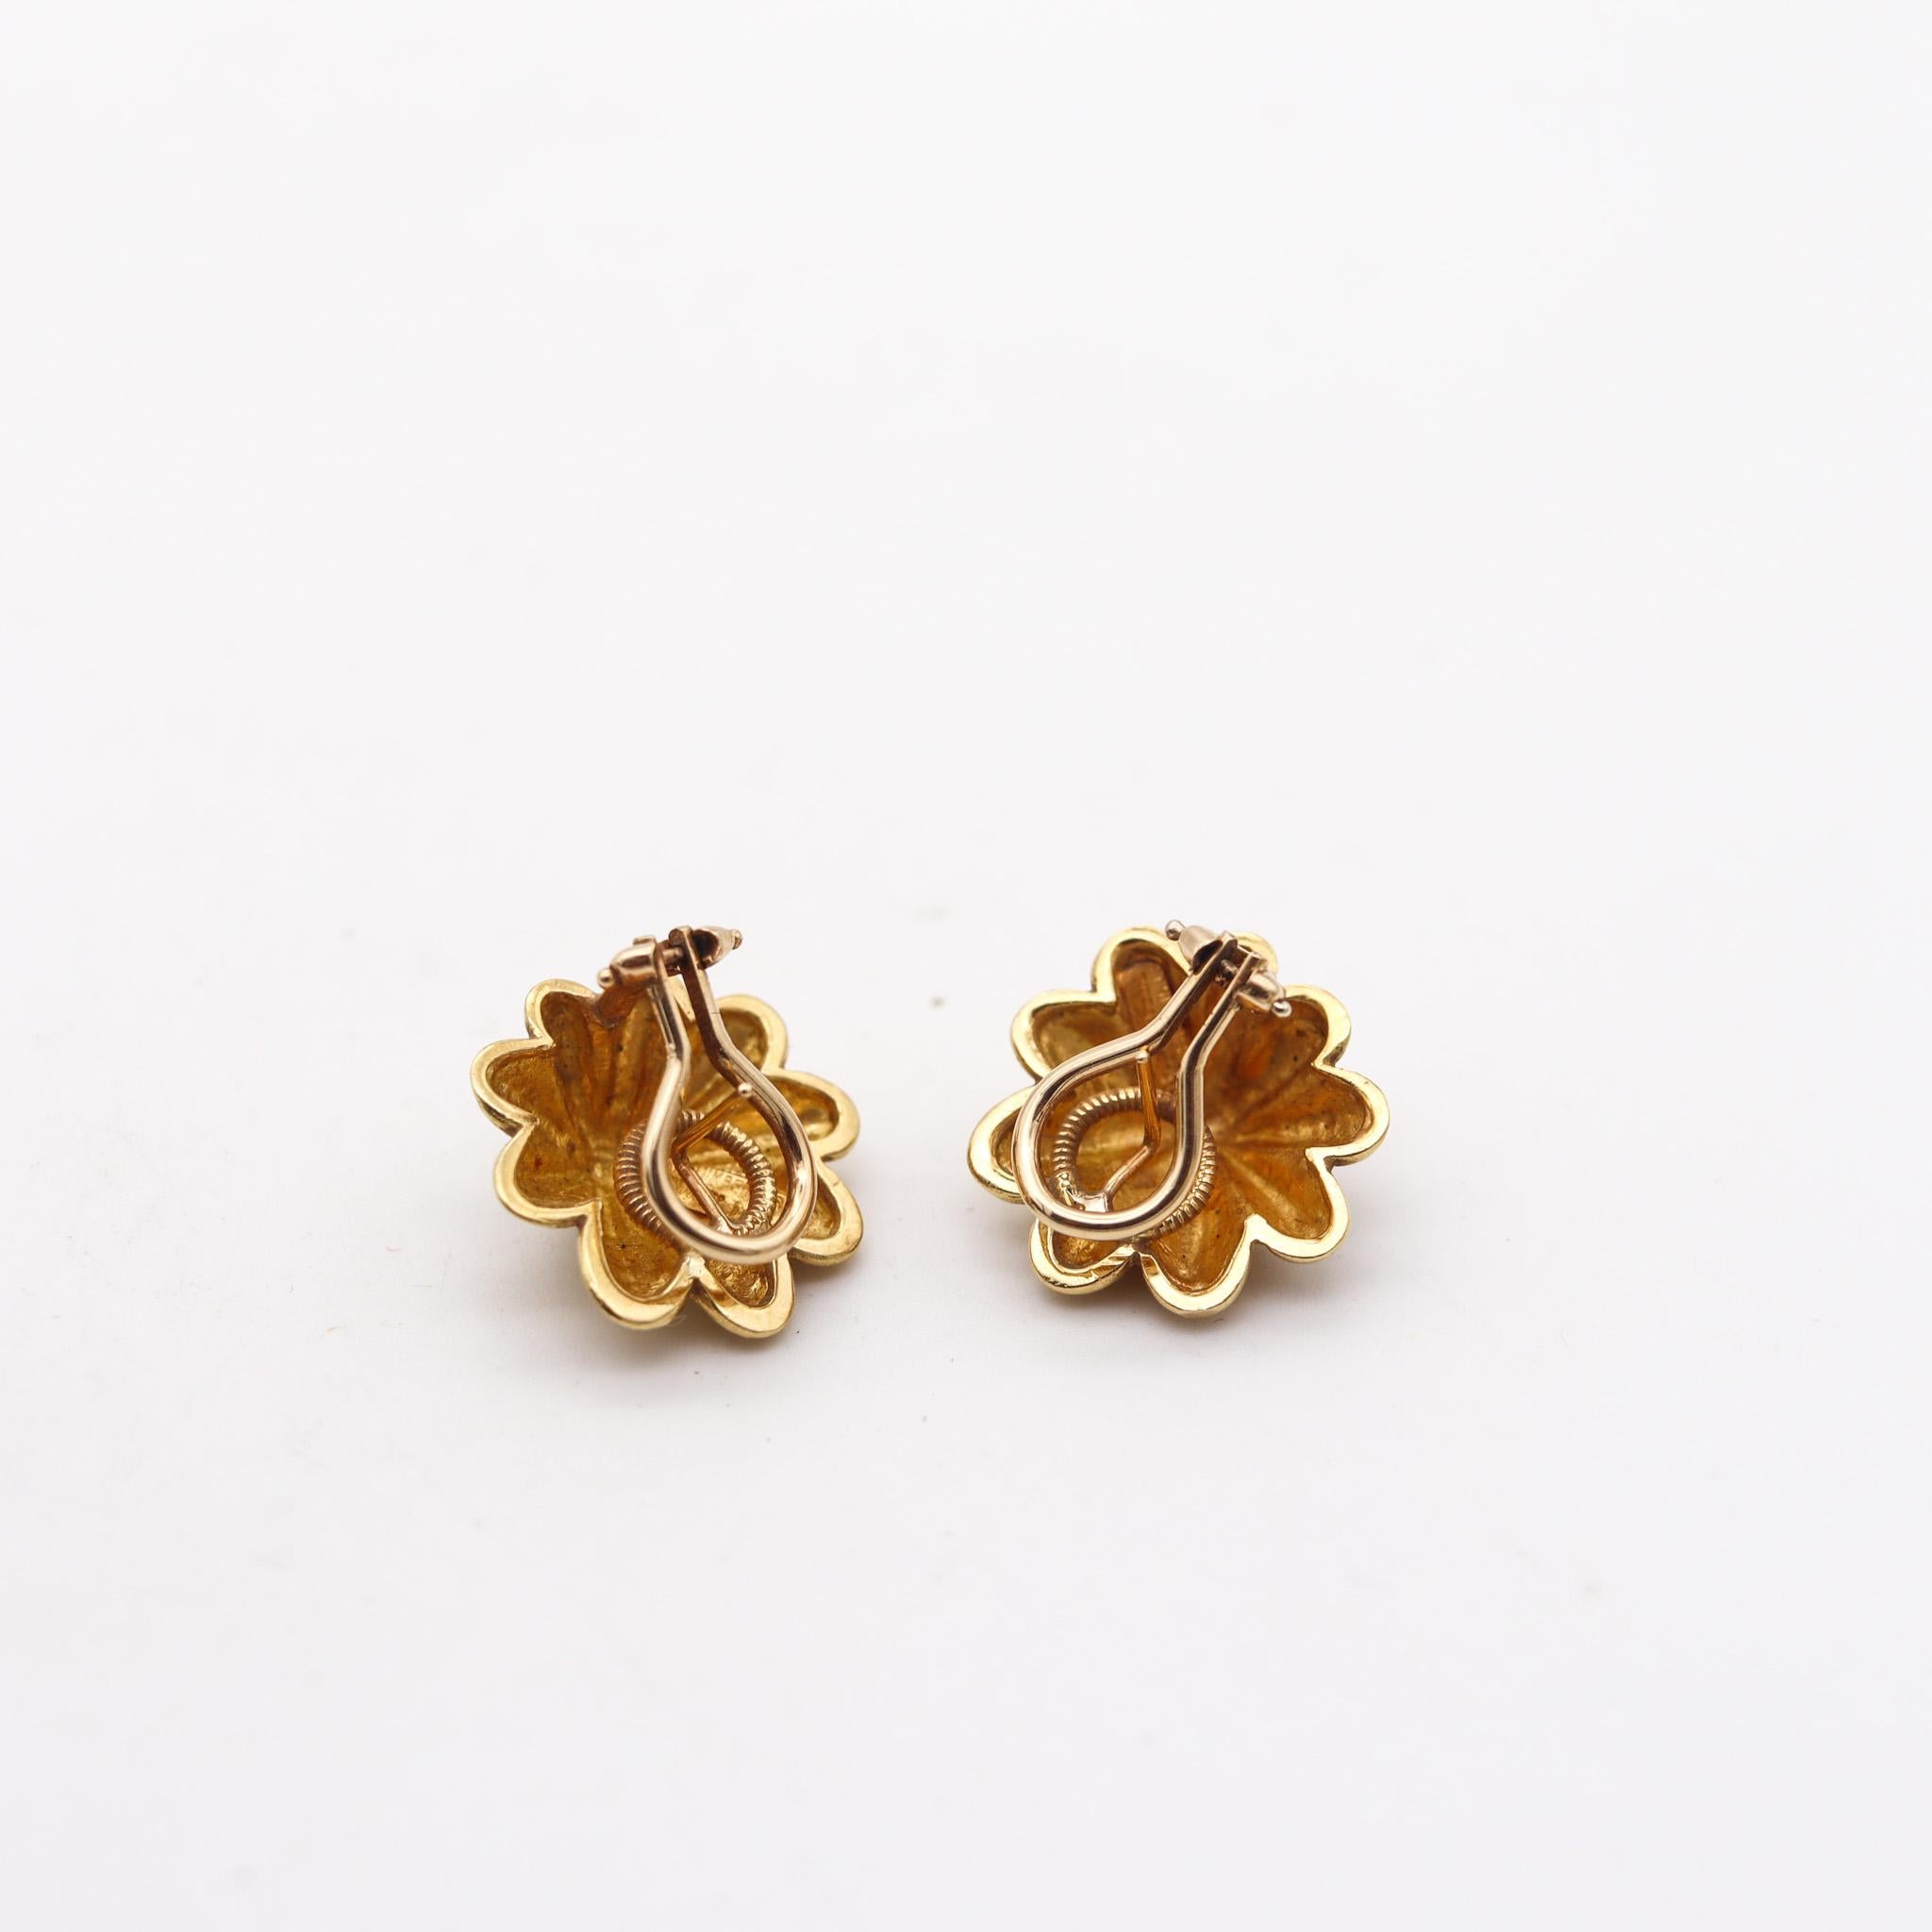 Tiffany & Co. 1970 Schlumberger Scalloped Clips-On Earrings In 18Kt Yellow Gold In Excellent Condition For Sale In Miami, FL